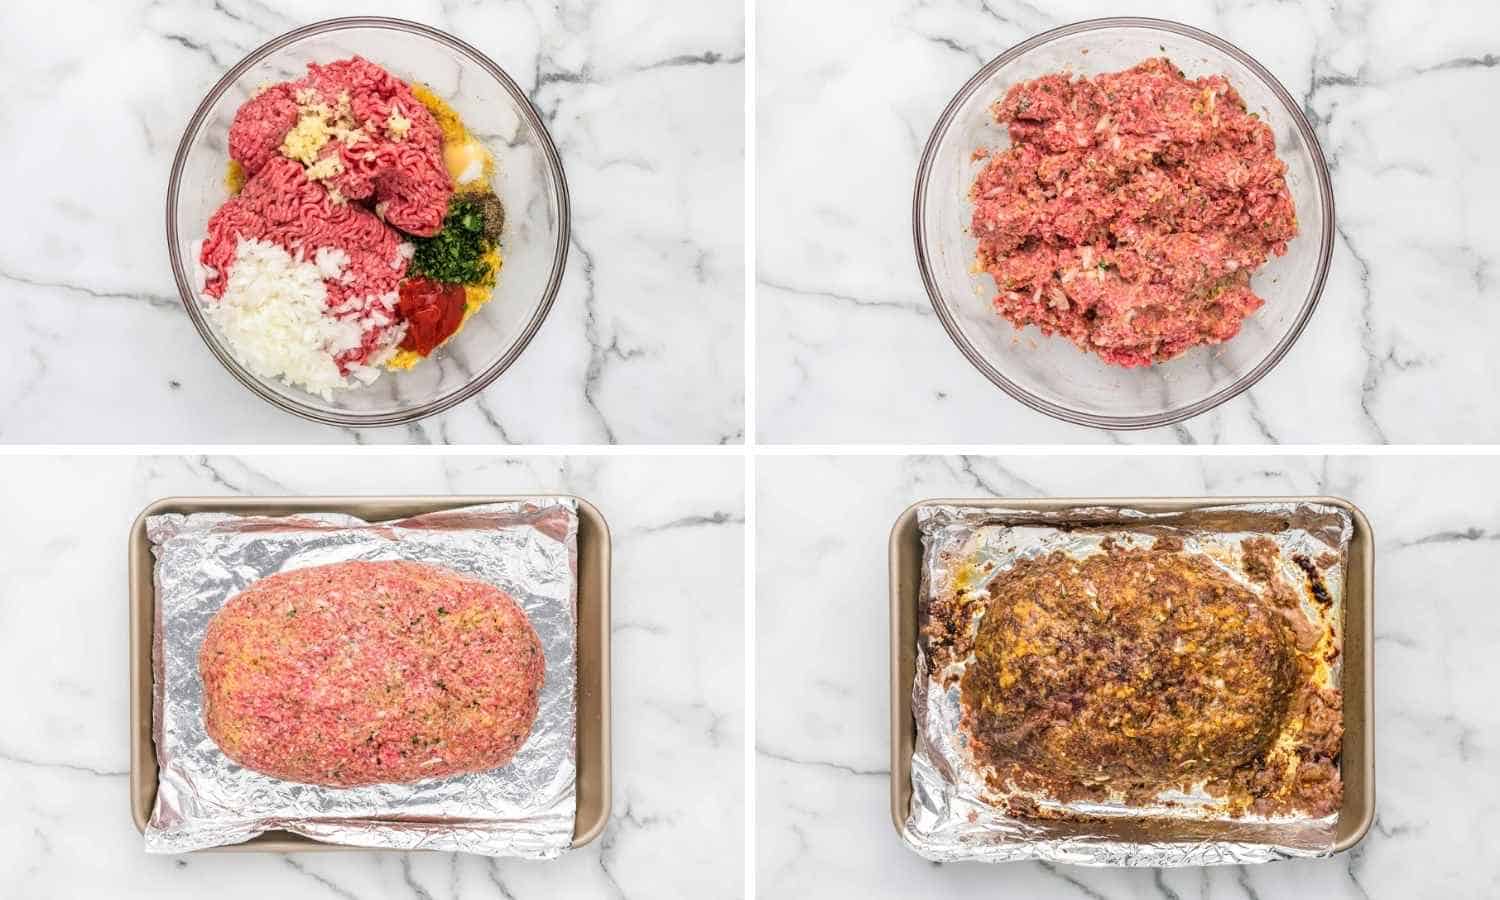 Making the Meatloaf Mixture and Shaping it